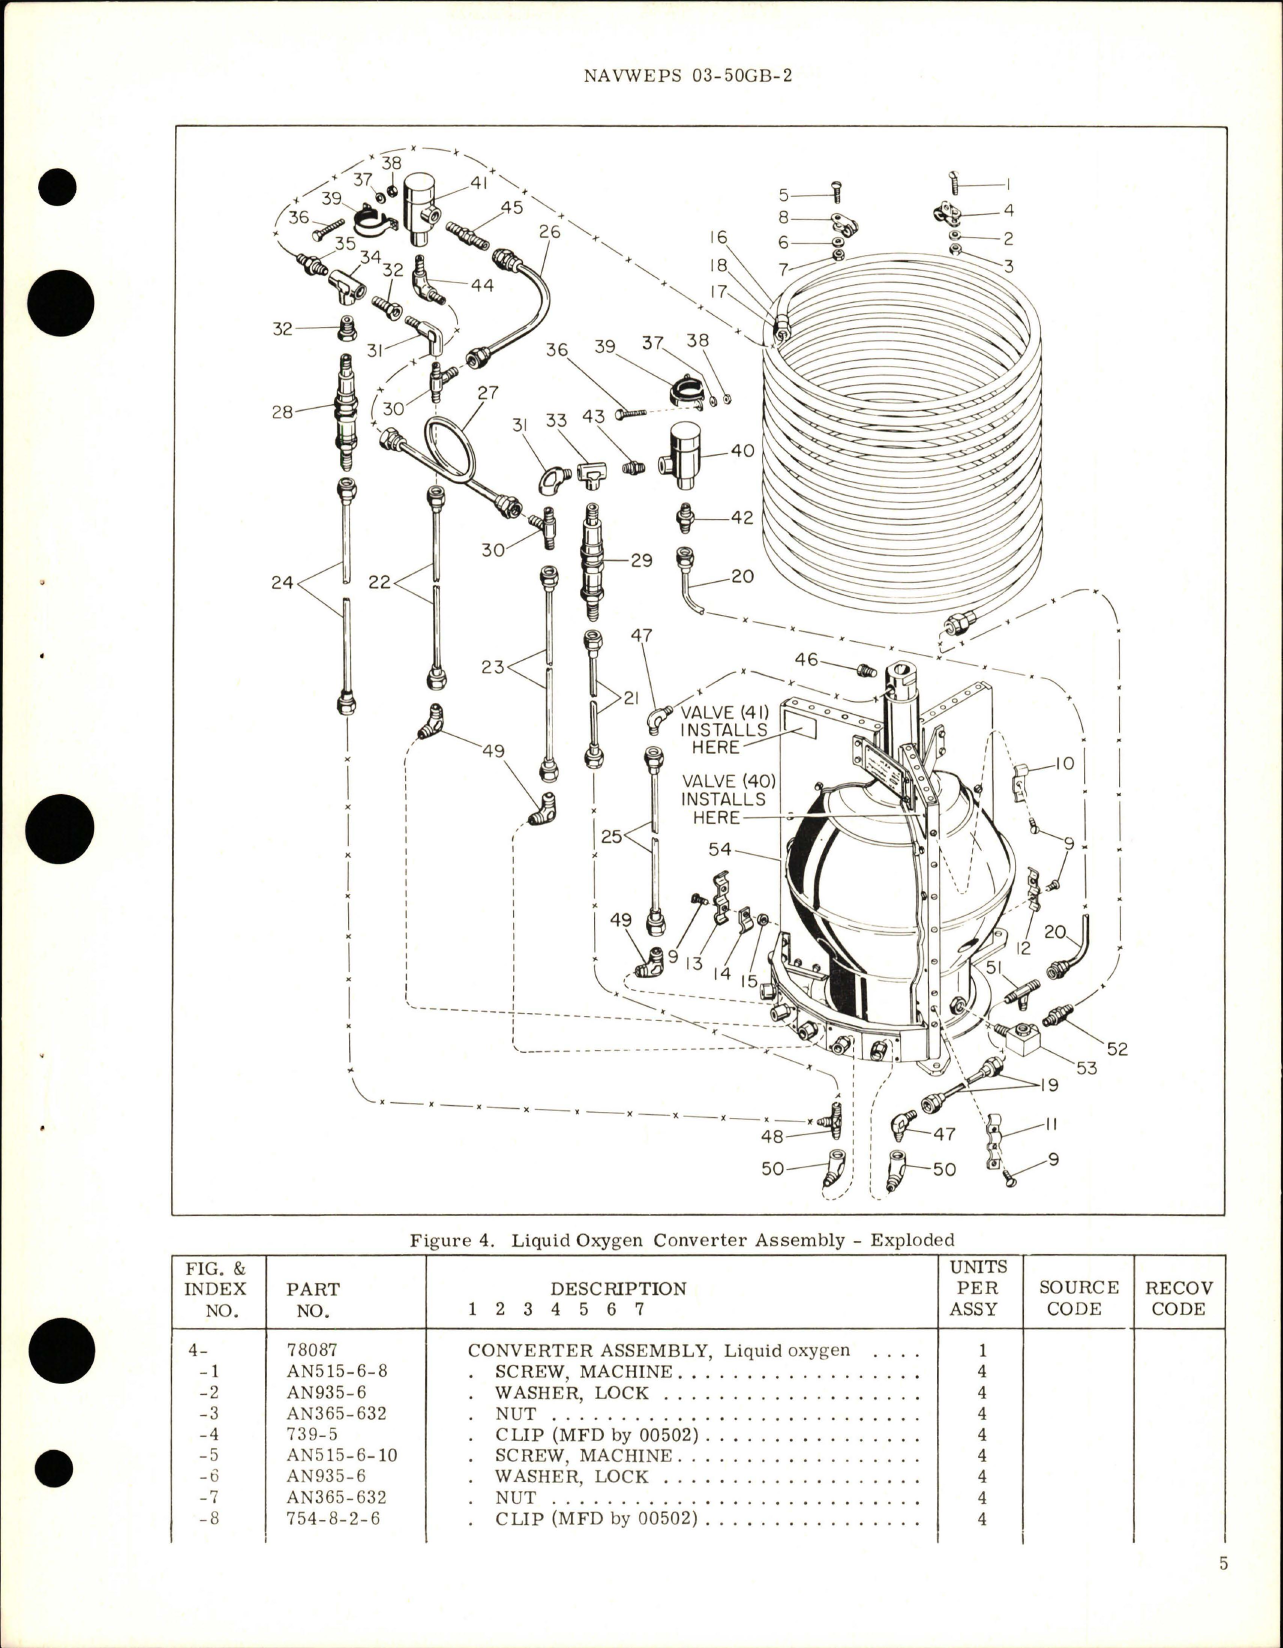 Sample page 5 from AirCorps Library document: Overhaul Instructions with Parts Breakdown for Liquid Oxygen Converter - Part 78087 